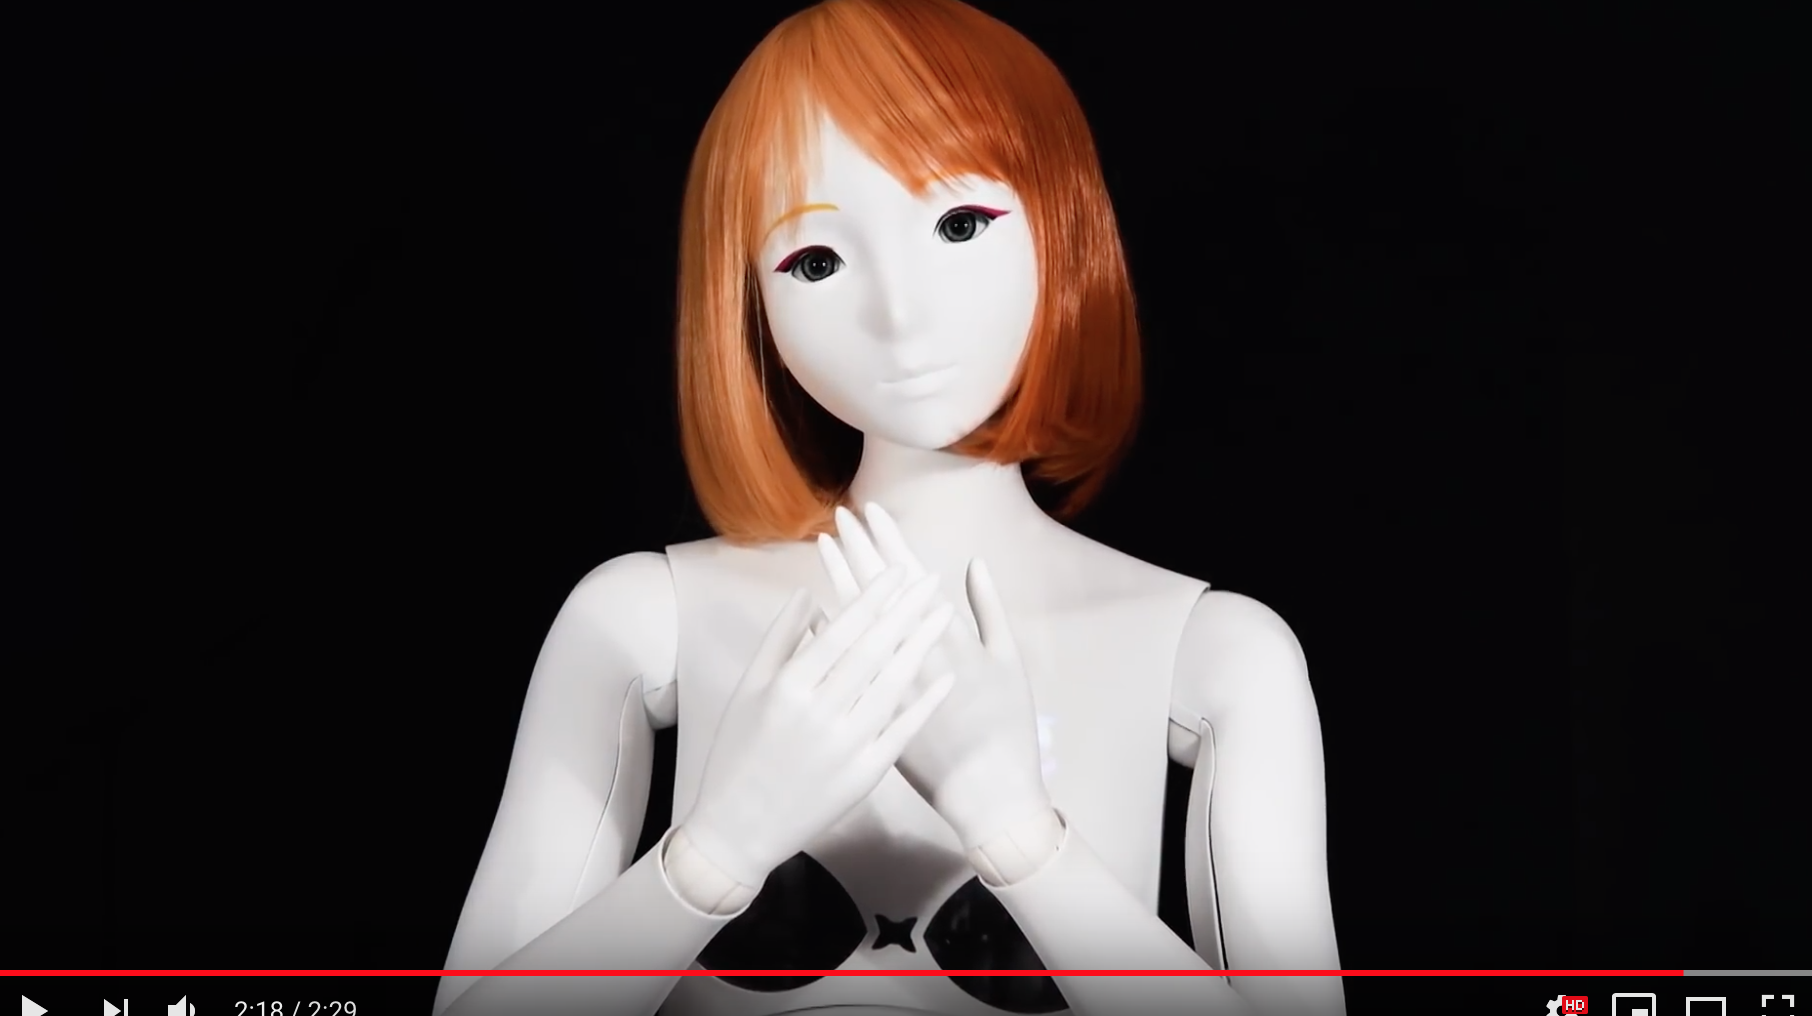 Bring your 2-D waifu to life with world's first life-sized “emotional”  robotic figurine 【Video】 | SoraNews24 -Japan News-